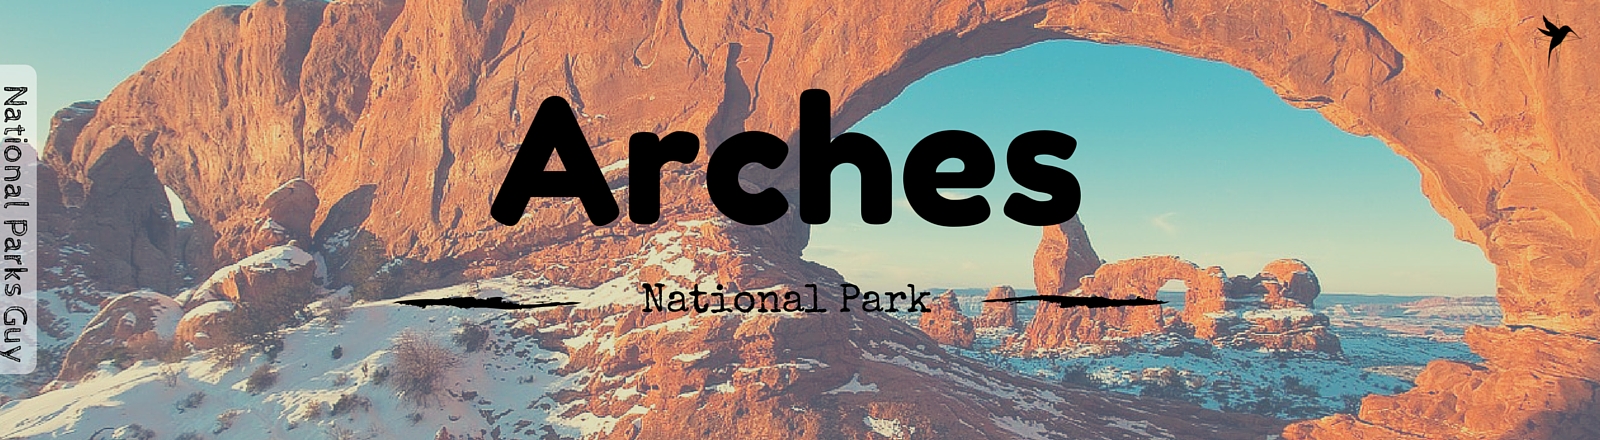 Arches National Park, USA, National Parks Guy, Stories, Tales, Adventures, Wildlife